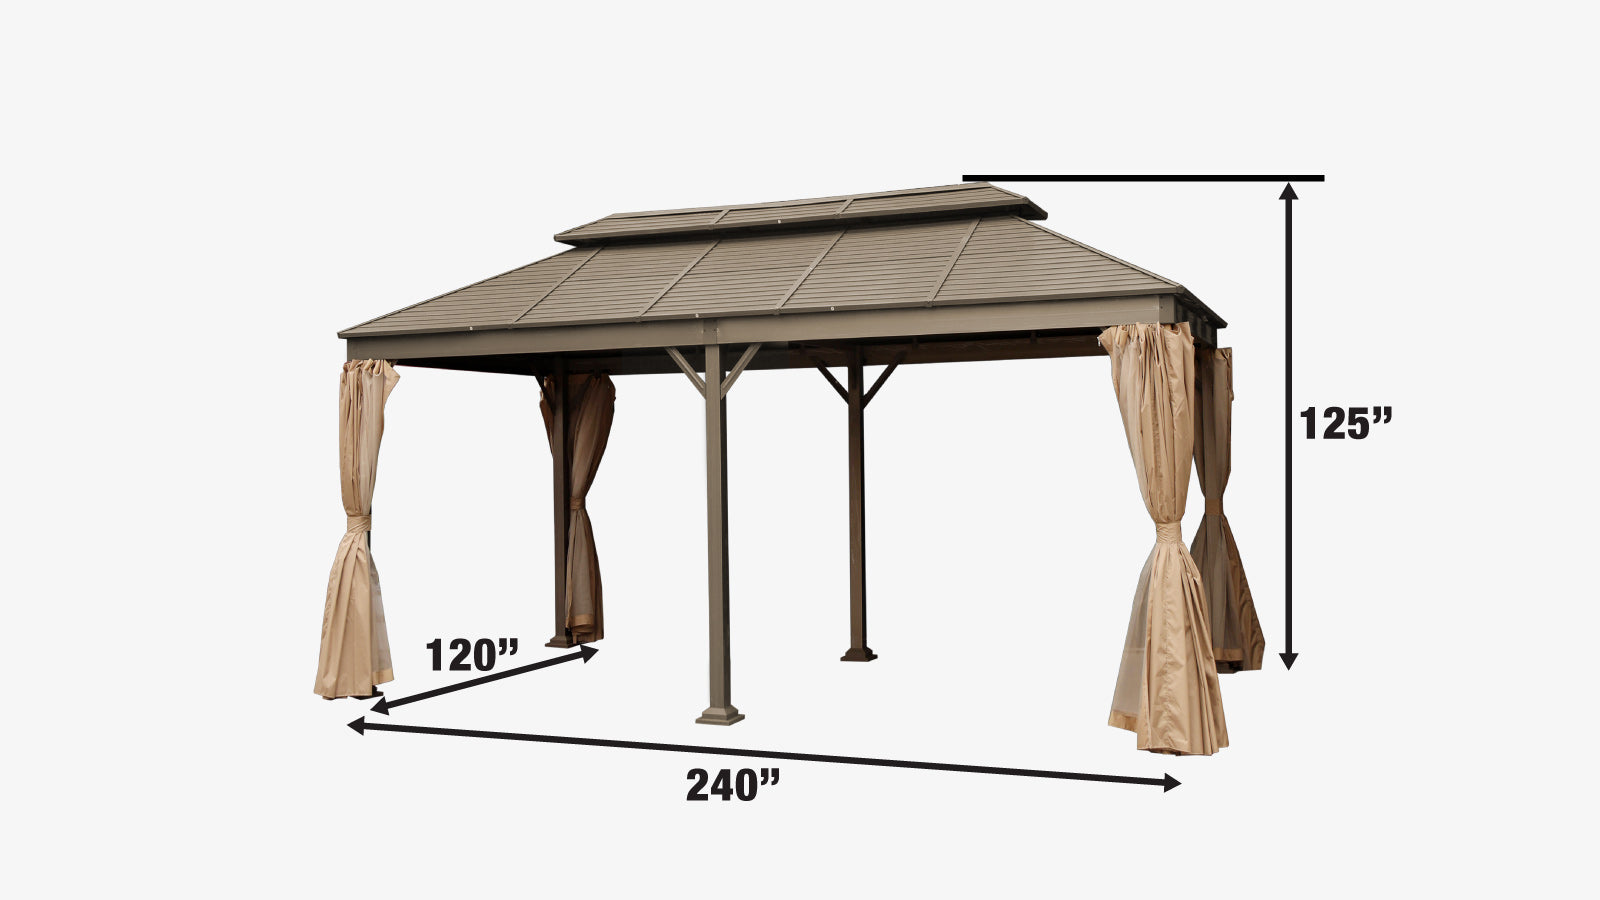 TMG Industrial 10’ x 20’ Hardtop, Double Tier Steel Roof Patio Gazebo, Mosquito Nets & Curtains Included, TMG-LGZ21-specifications-image